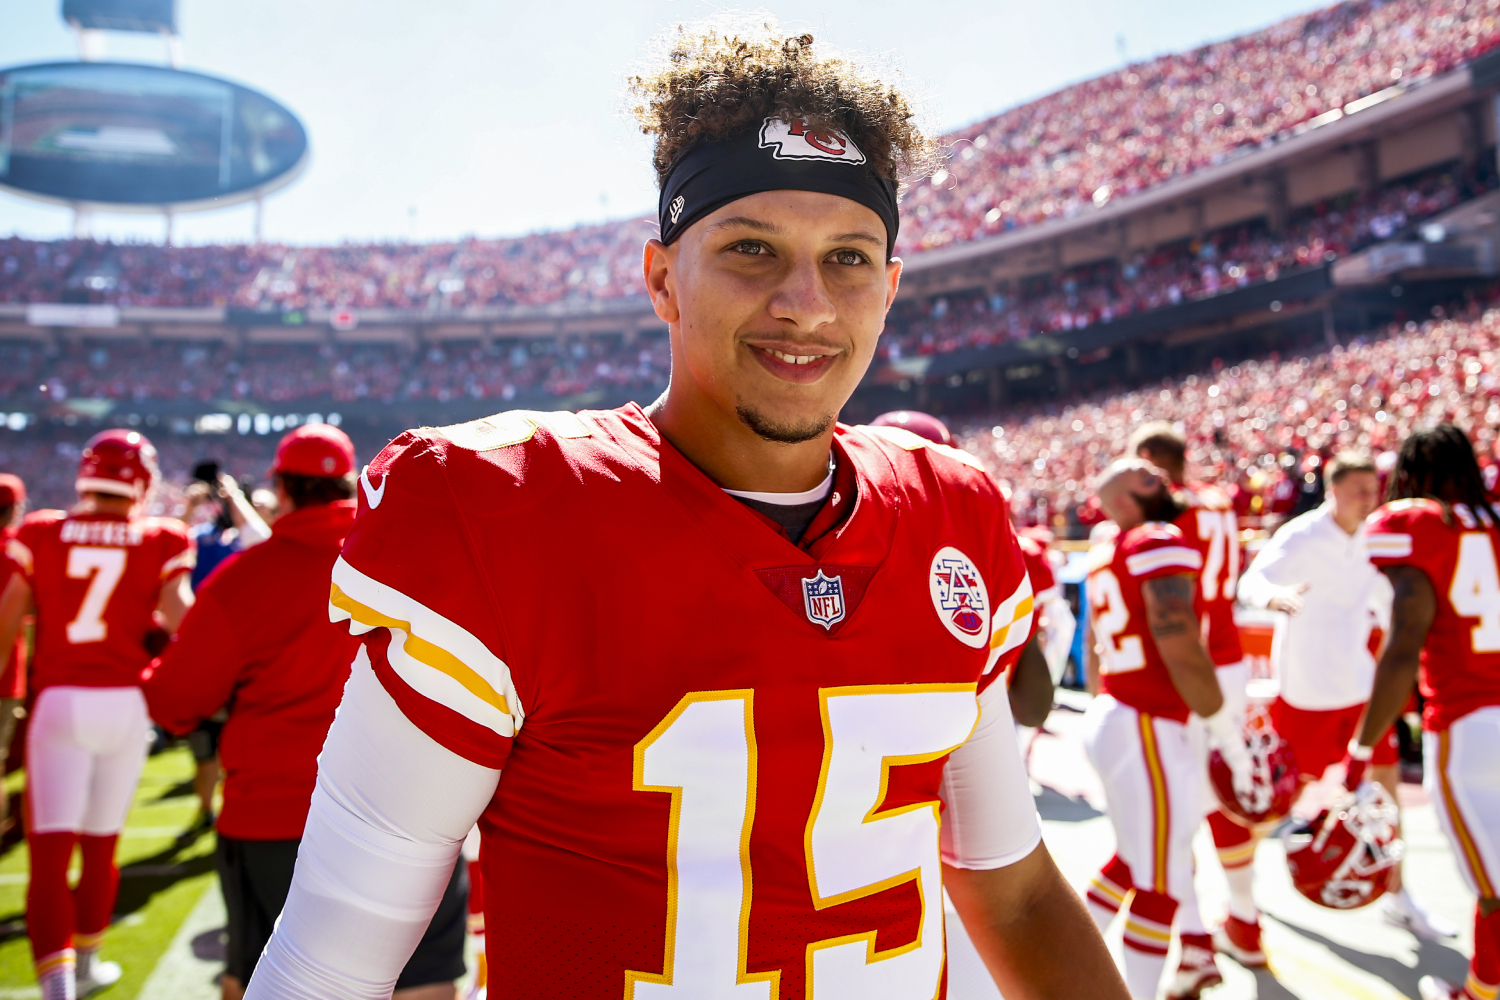 Patrick Mahomes’ New Deal Got a Big Reaction From O.J. Simpson